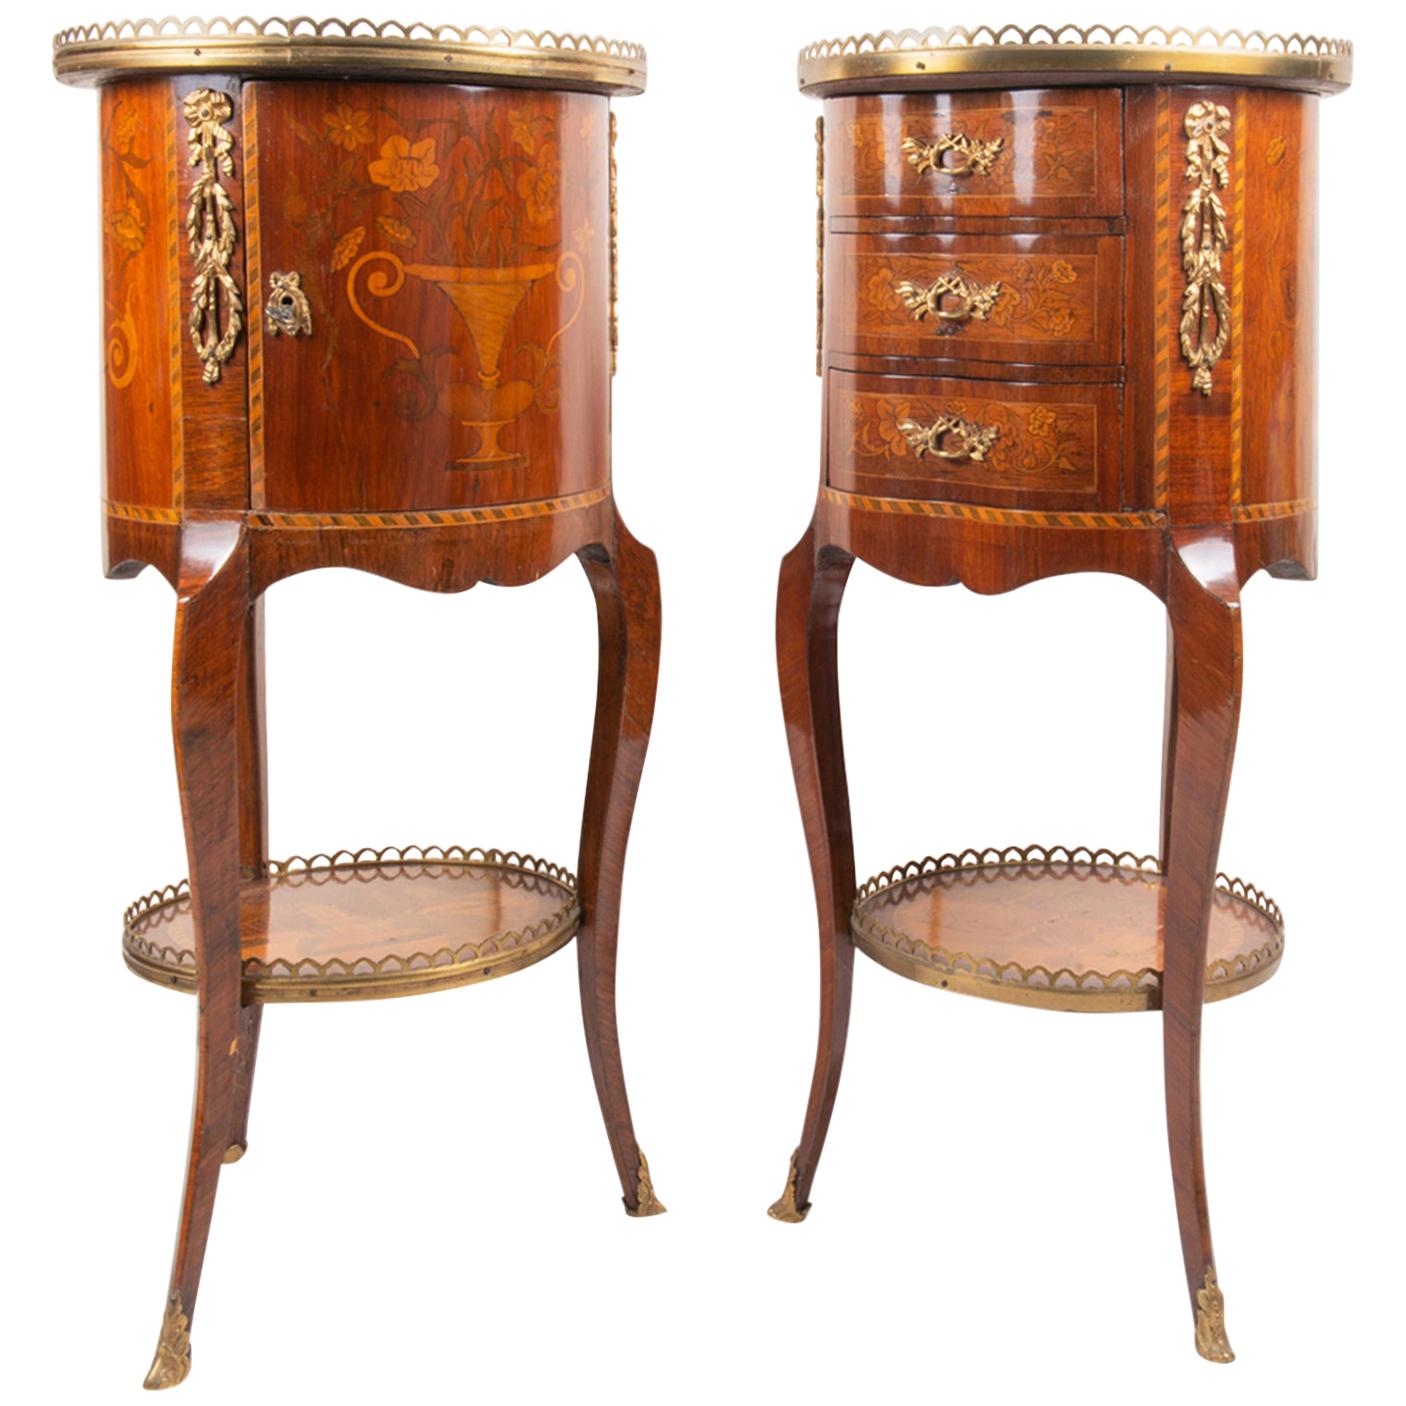 Pair of French Inlaid Side Cabinets, Louis XVI Style, circa 1900